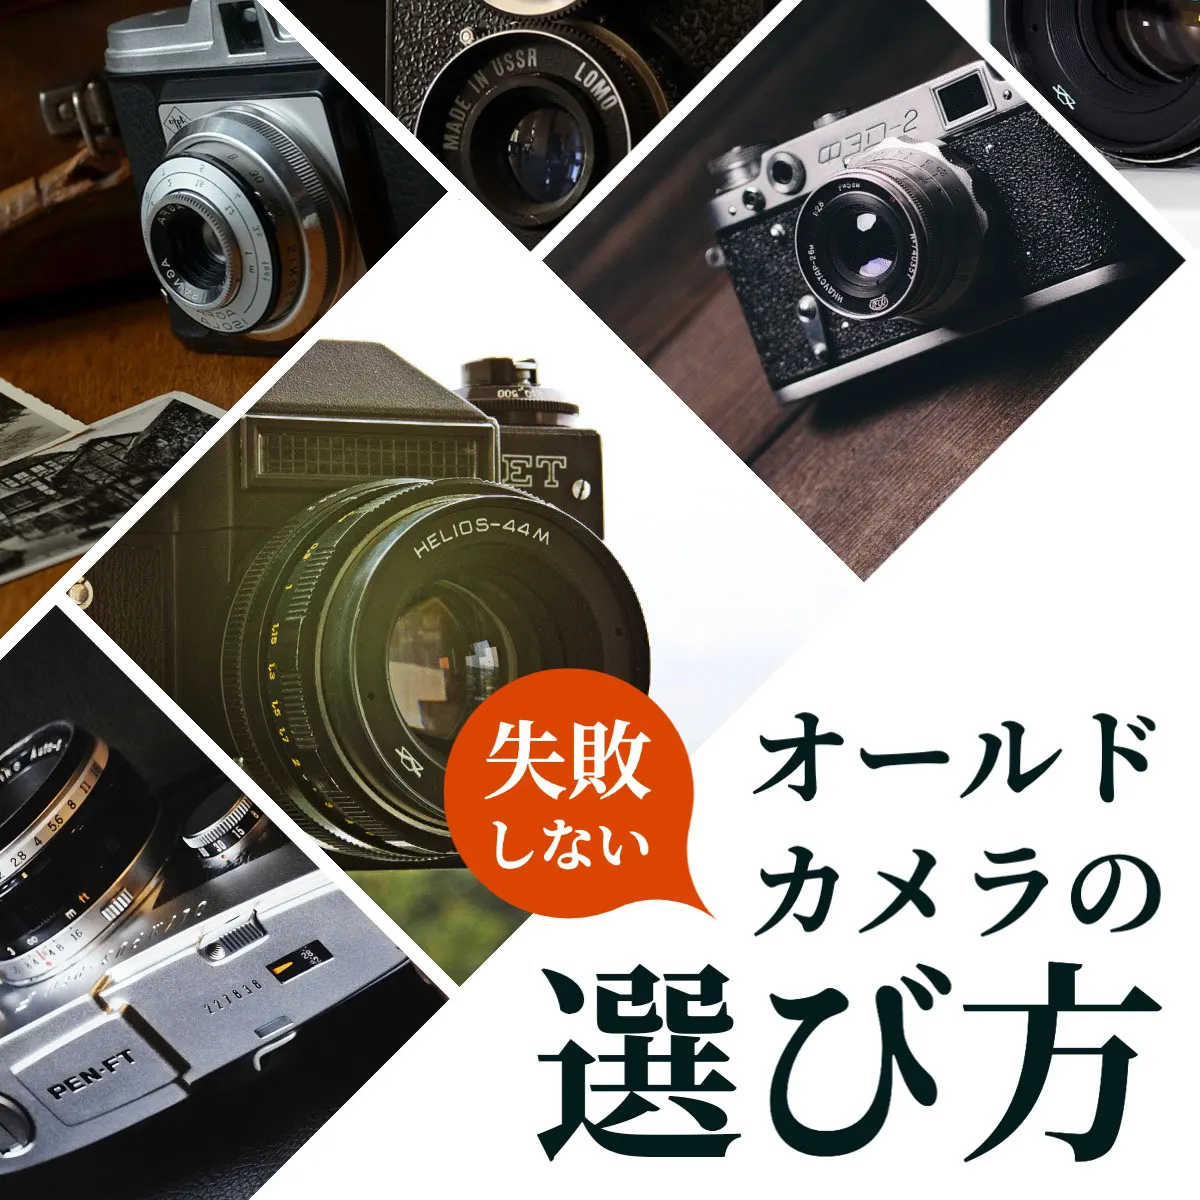 about old camera photo grid